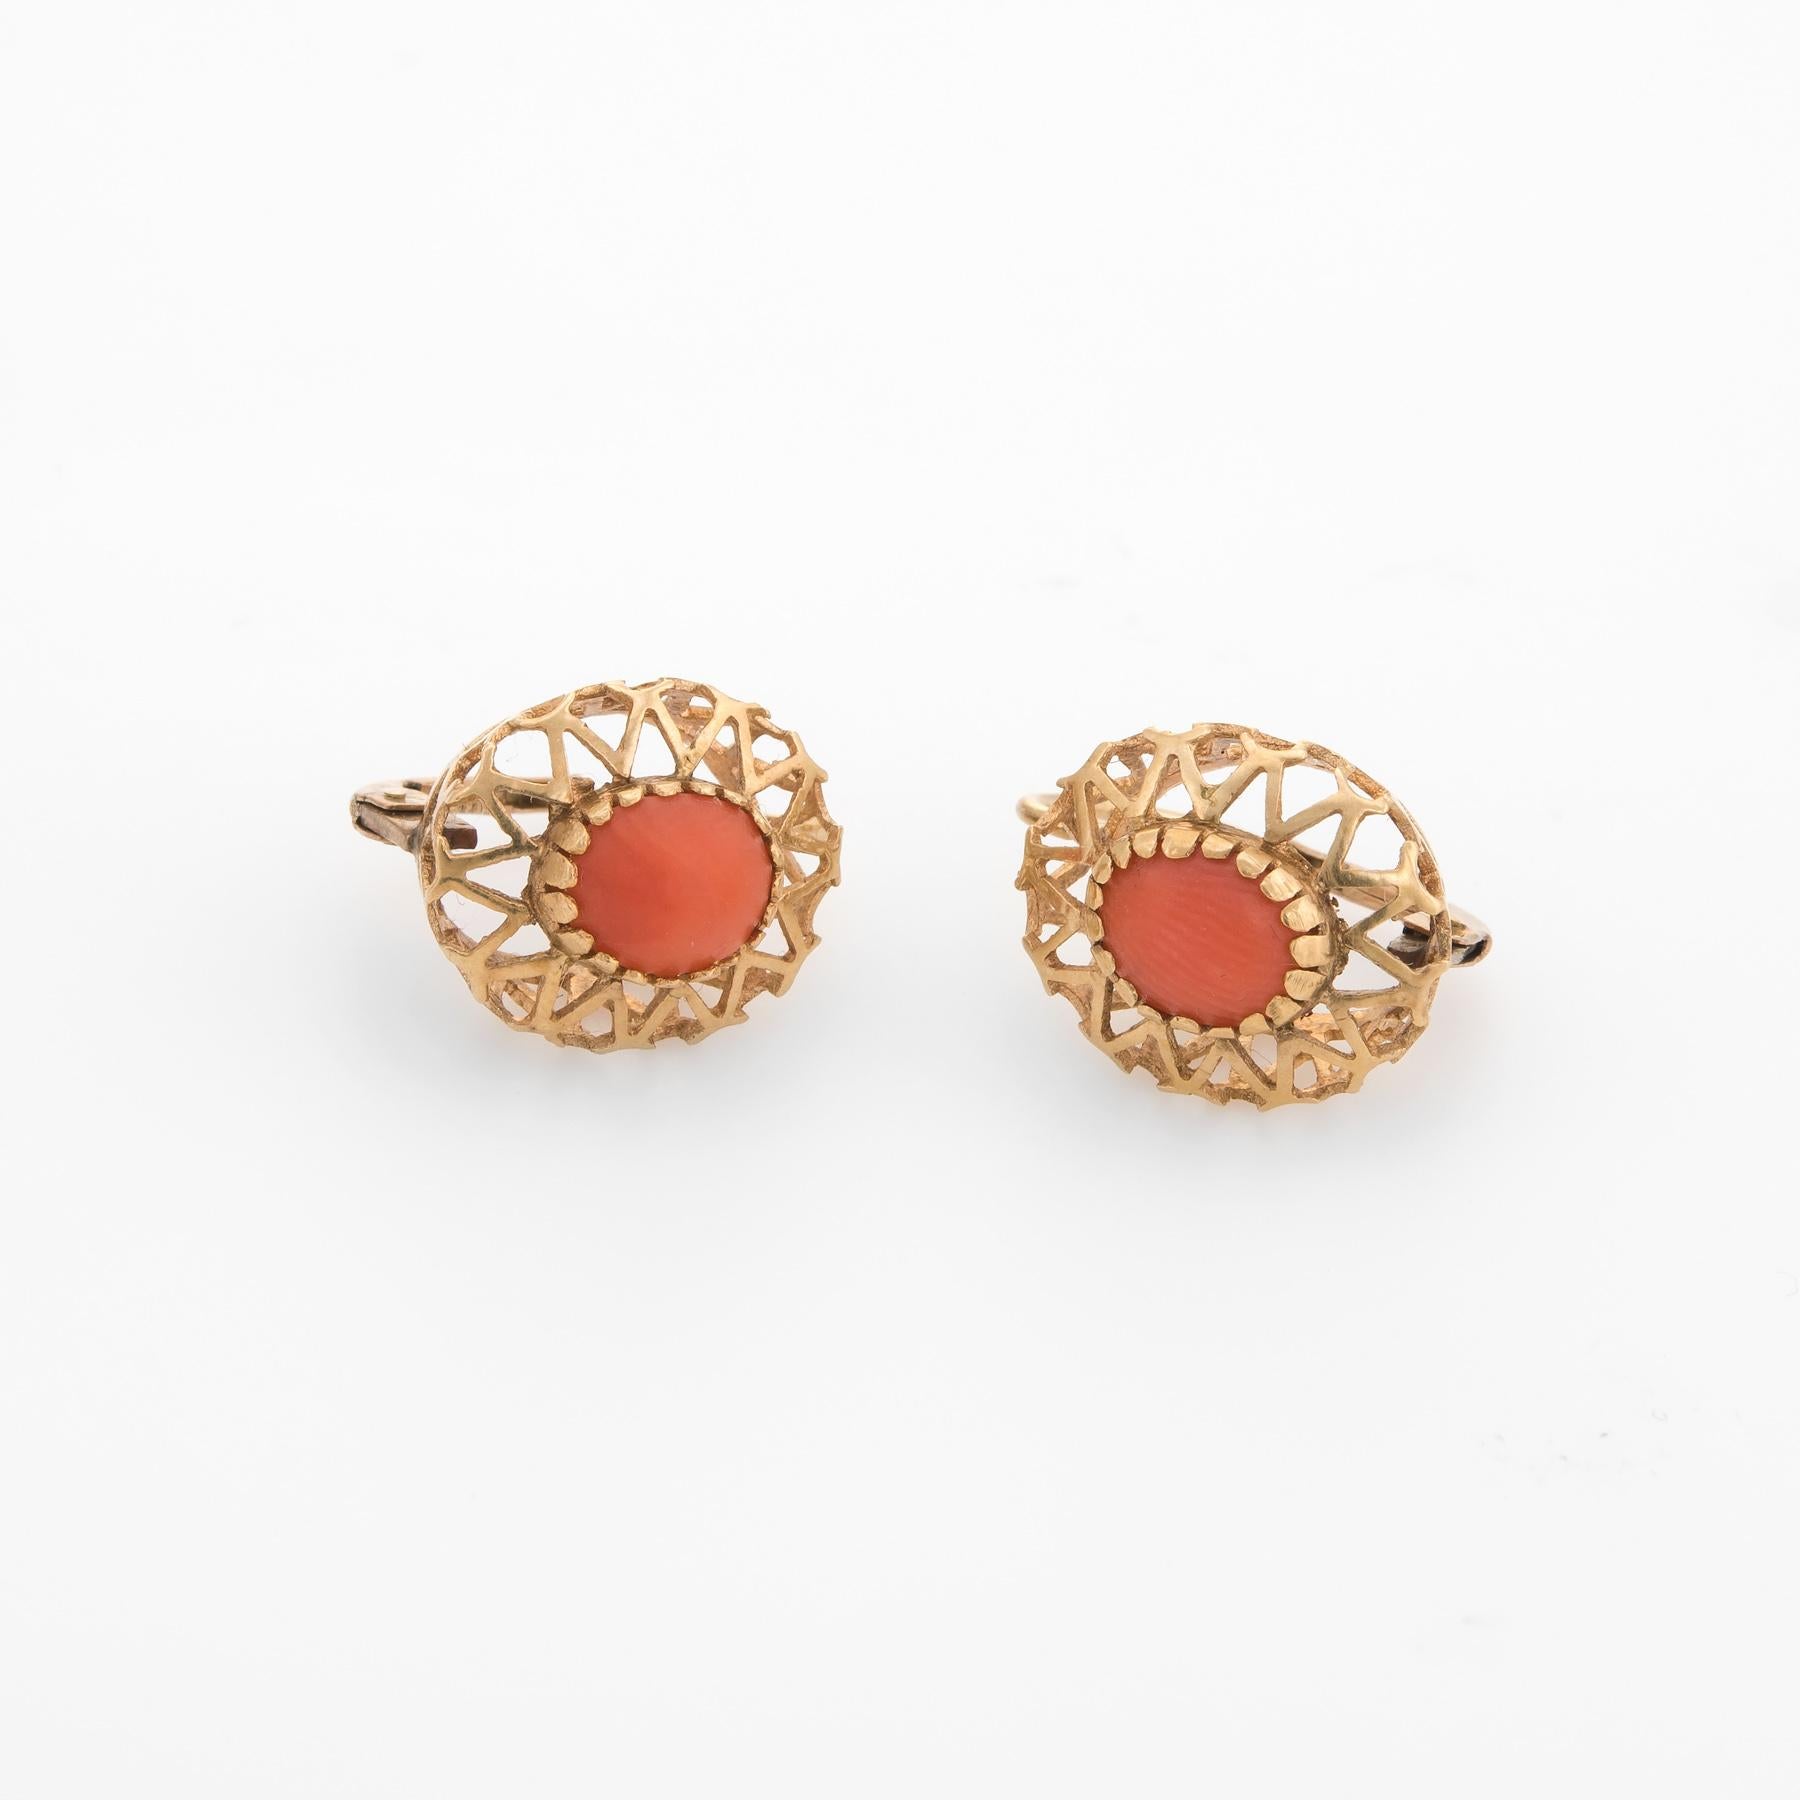 Elegant pair of vintage Mediterranean red coral earrings (circa 1950s to 1960s), crafted in 10k yellow gold. 

Cabochon cut red coral measures 7.5mm x 6mm (estimated at 1 carat each - 2 carats total estimated weight). The coral is in excellent